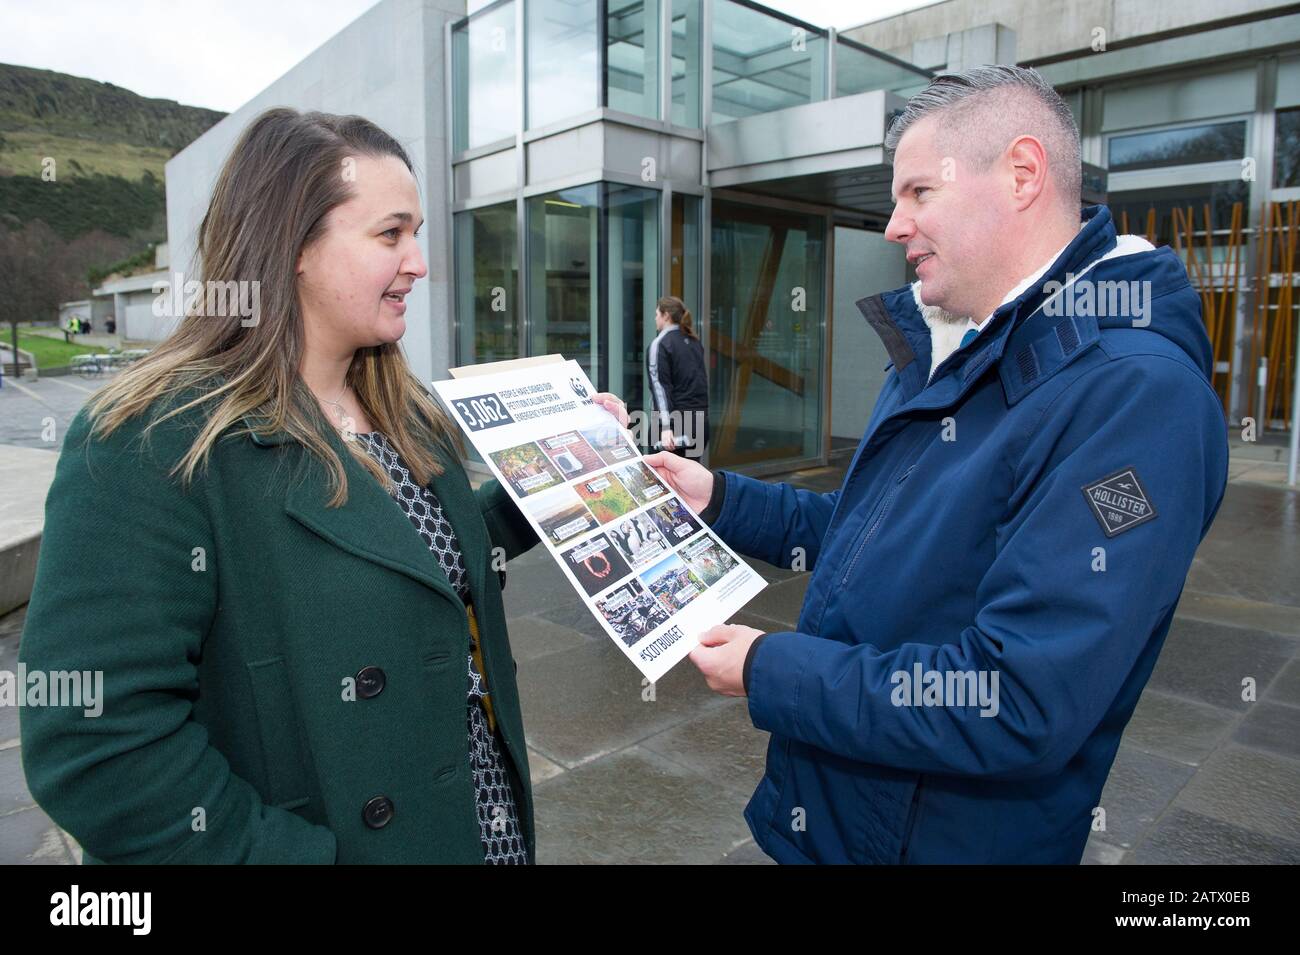 Edinburgh, UK. 5th Feb, 2020. Pictured: (L-R) Lyndsey Croal - Public Affairs of WWF Scotland; Derek Mackay MSP - Cabinet Minister for Finance. People from WWF (World Wild Fund) are seen petitioning Finance Minister, Derek Mackay outside the Scottish Parliament the day before Scottish Budget is announced. WWF Scotland are calling for larger investment for agriculture, green energy, to restoring and protecting nature. https://www.wwf.org.uk/scotland/climate-crisis-emergency-response#edit-container Credit: Colin Fisher/Alamy Live News Stock Photo